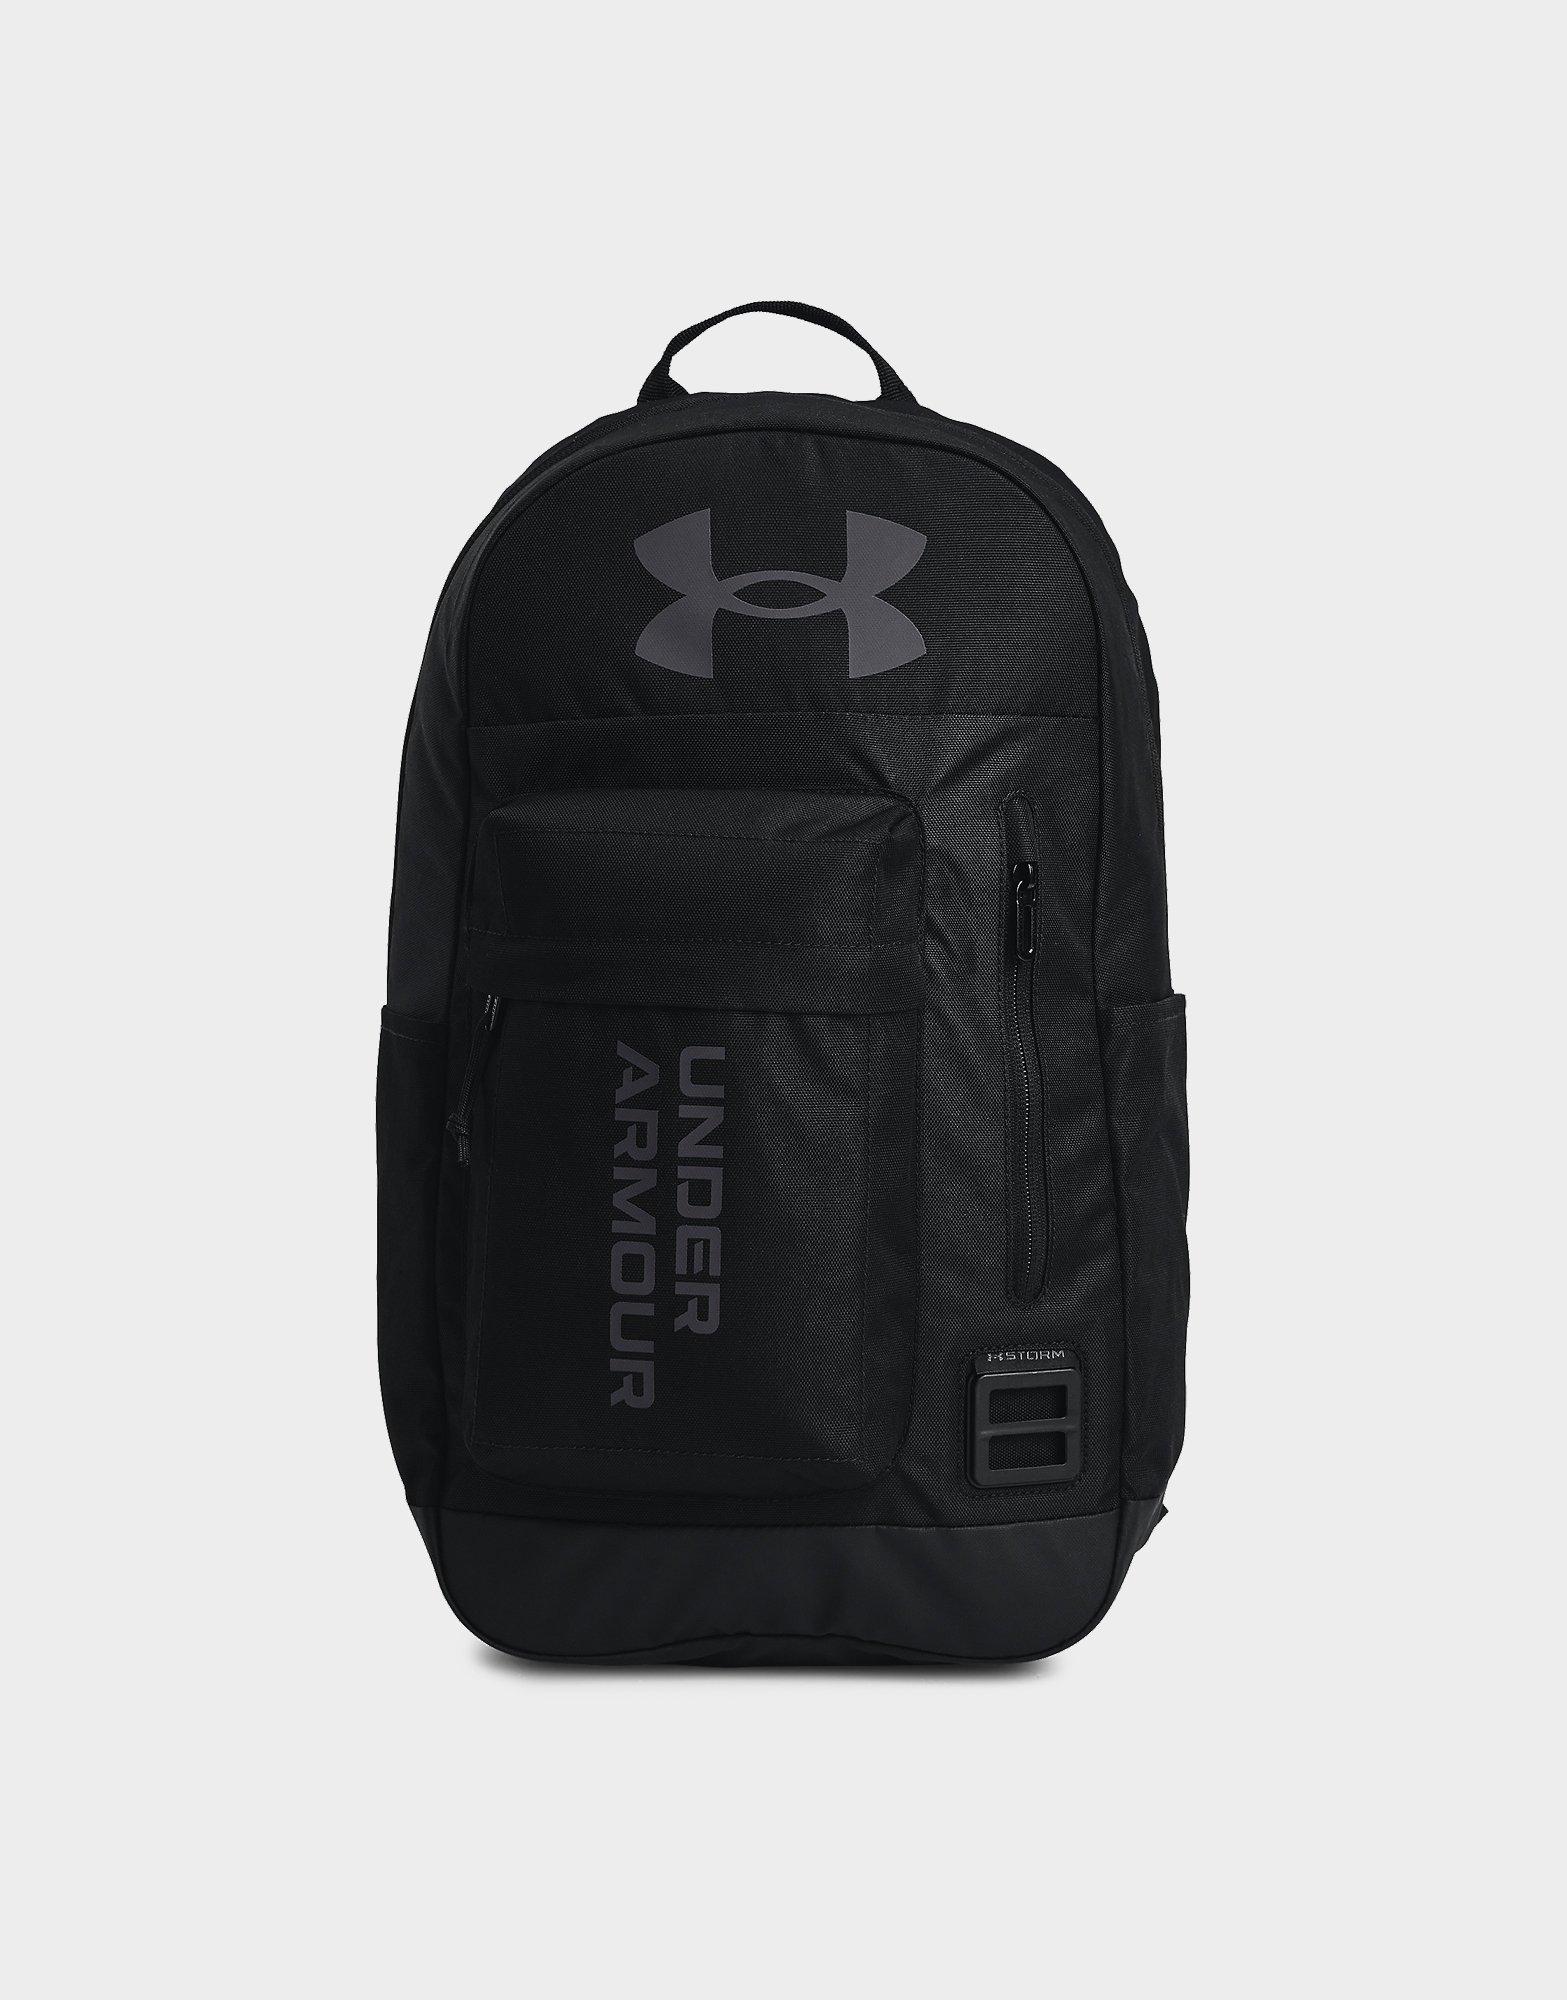 motto Scully Vies Black Under Armour Halftime Backpack Backpacks | JD Sports UK